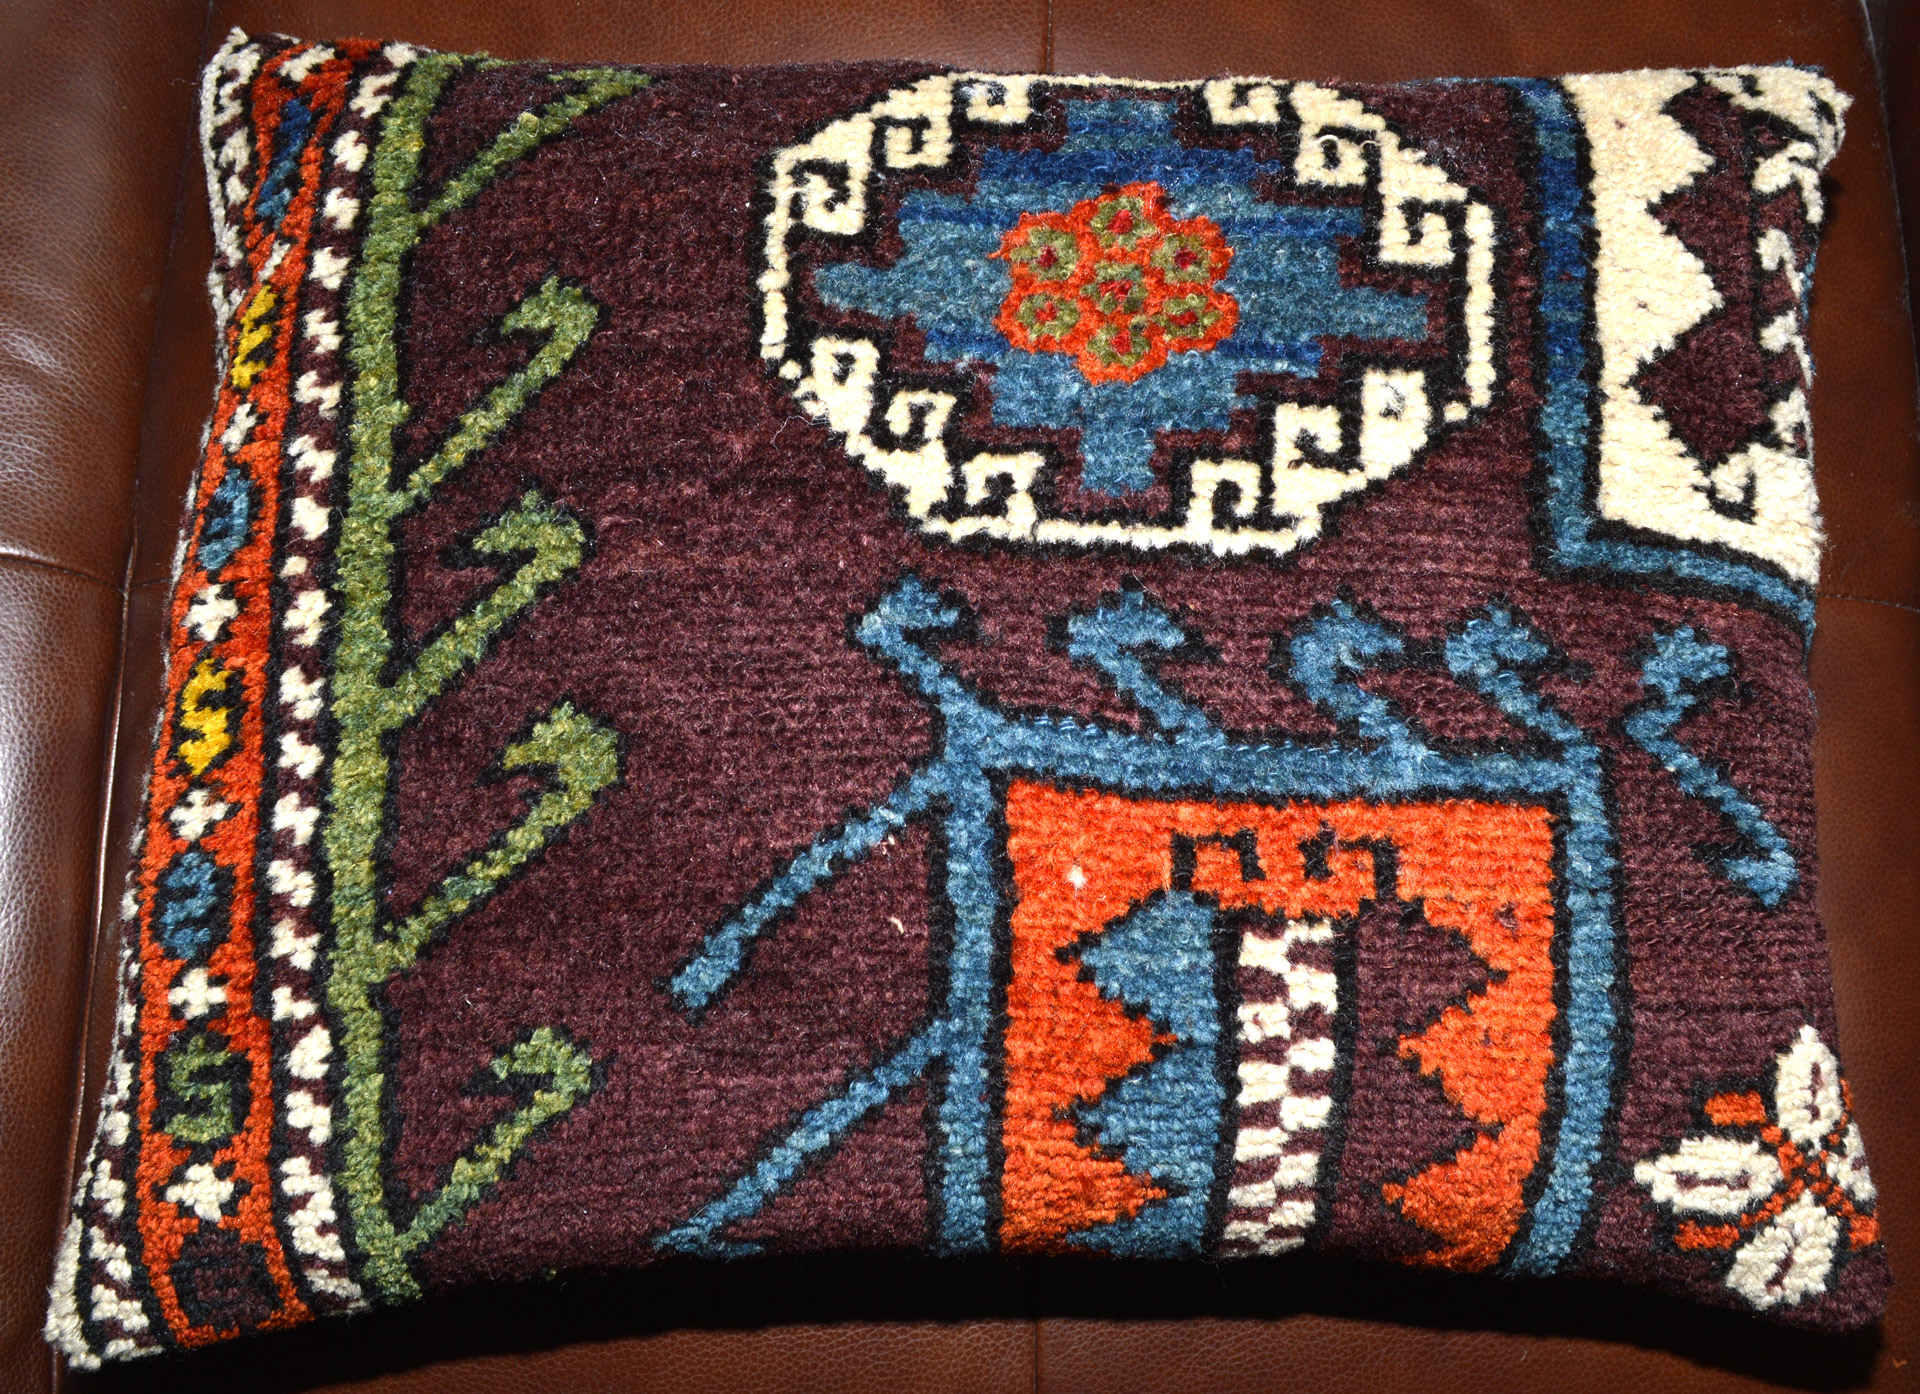 18" x 14" pillow made from a fragment of an antique Turkish Canakkale Bergama rug (pillow #2), antique Oriental rug pillows, antique Oriental rug cushions Boston,MA area, Douglas Stock Gallery